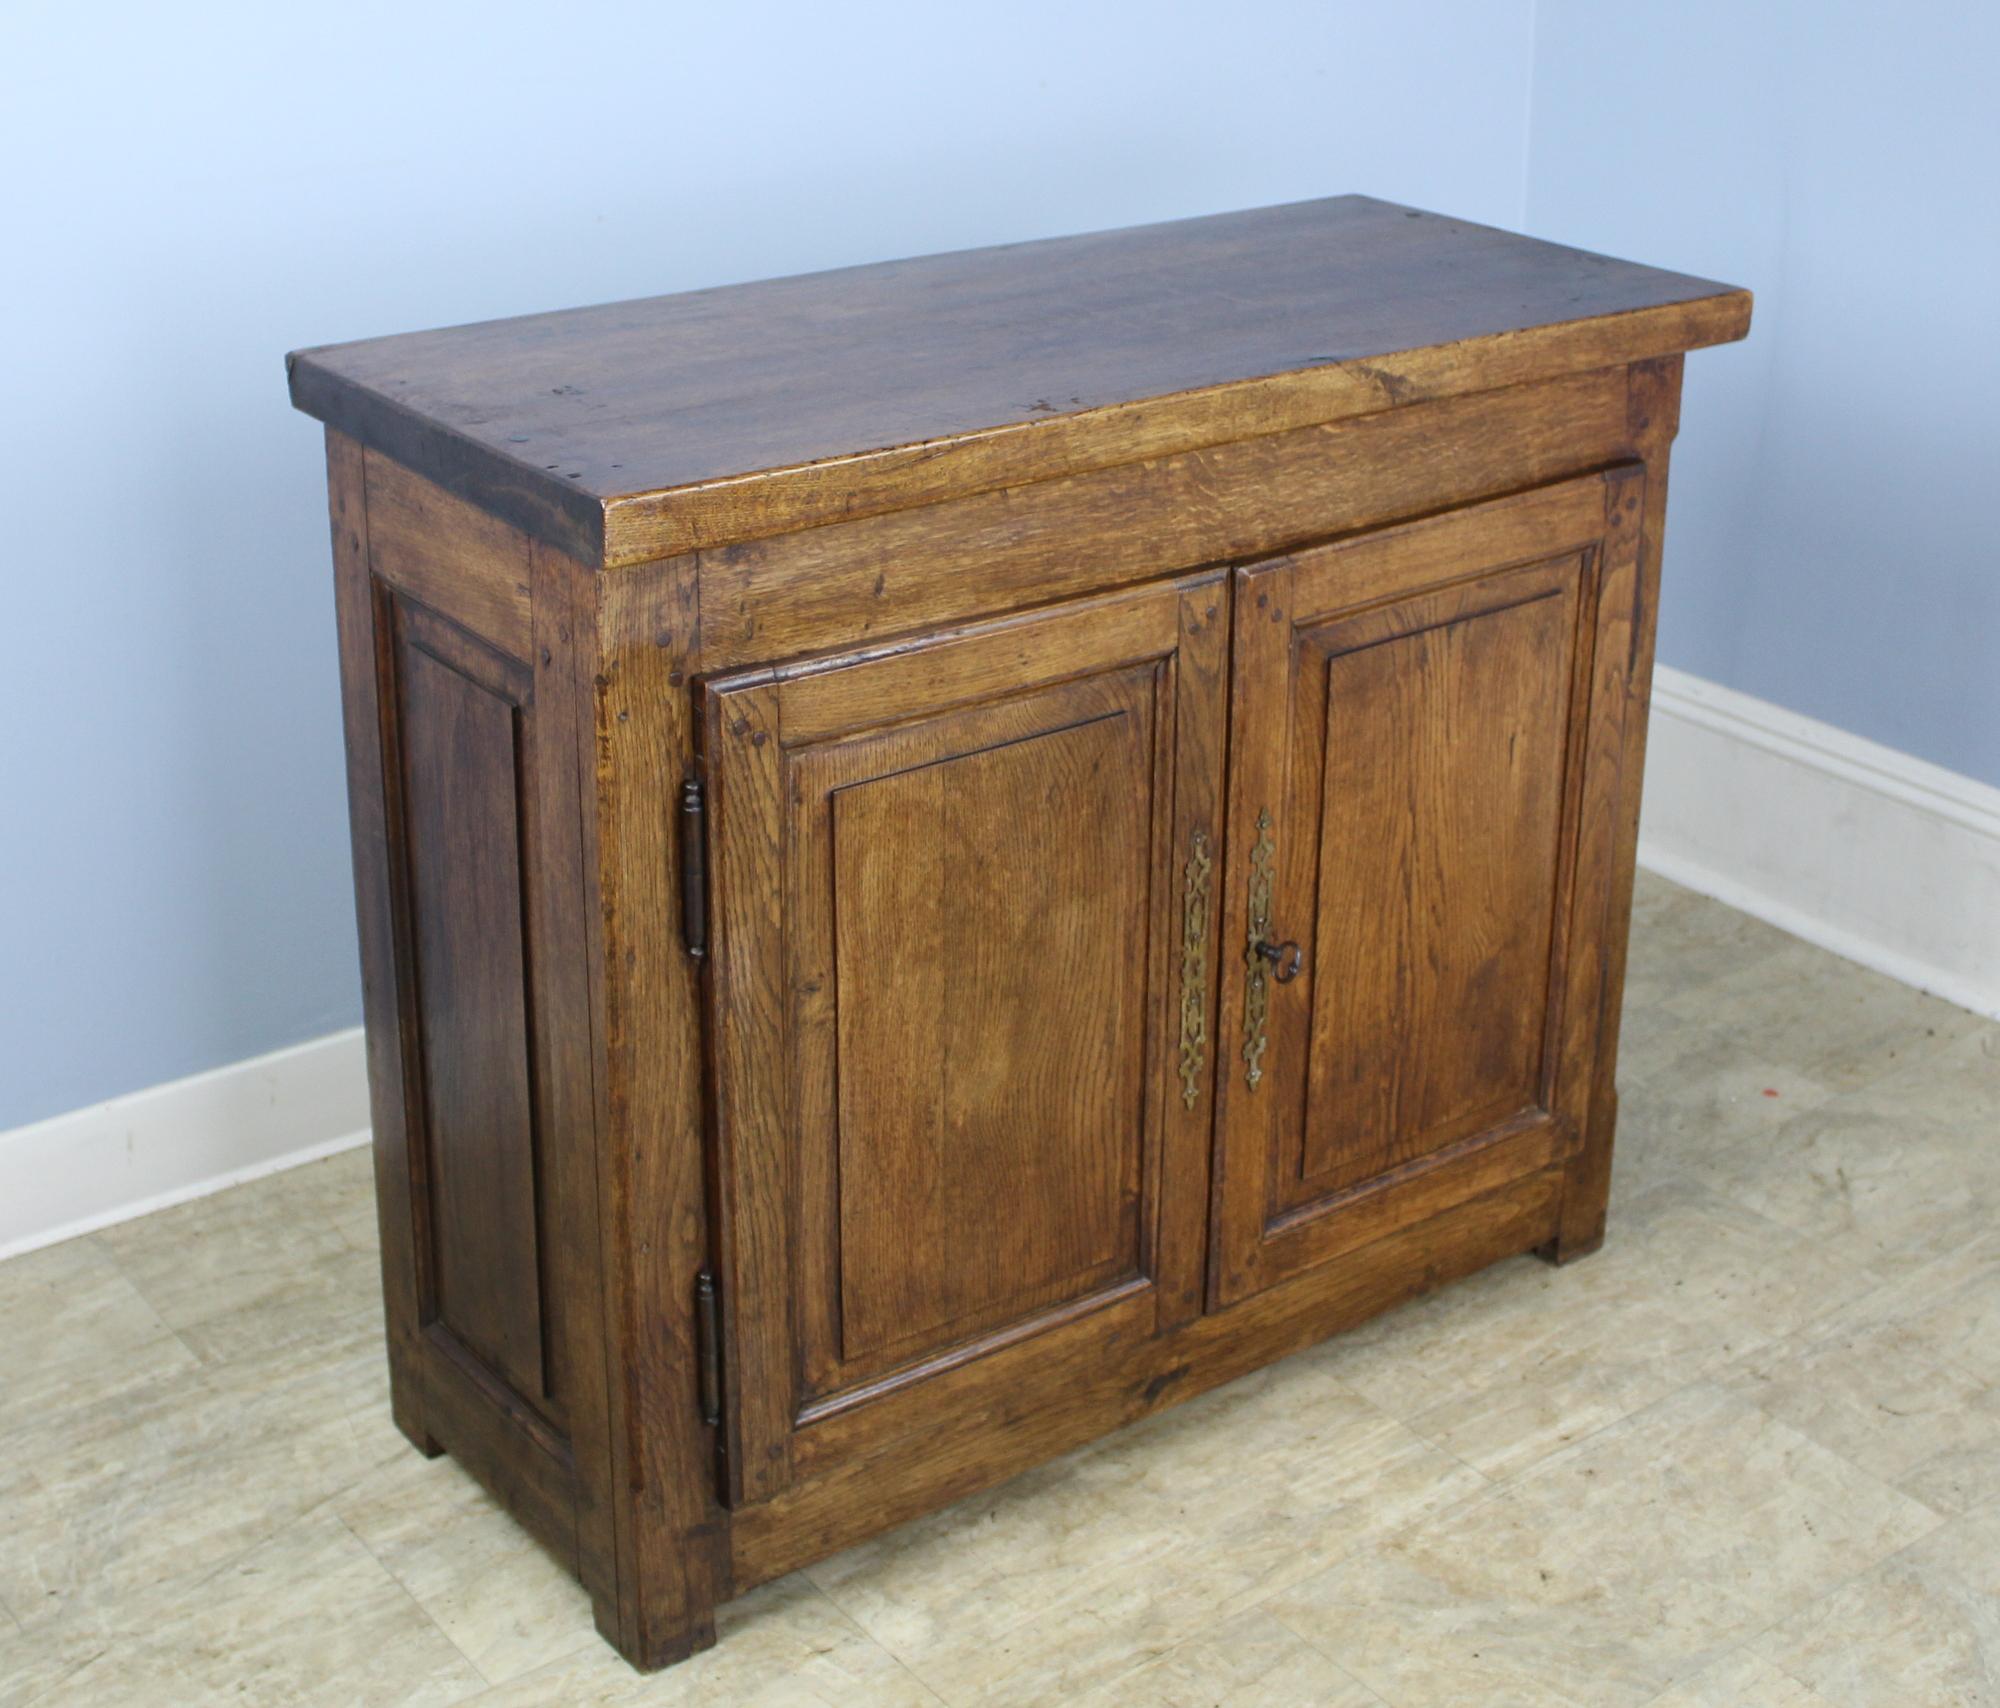 A solid and handsome oak cupboard, cabinet or small buffet in a great size. Very well constructed with nice inset panels on front and sides and a good thick chunky top. Doors open and close easily and snugly with original key. Good color and patina.